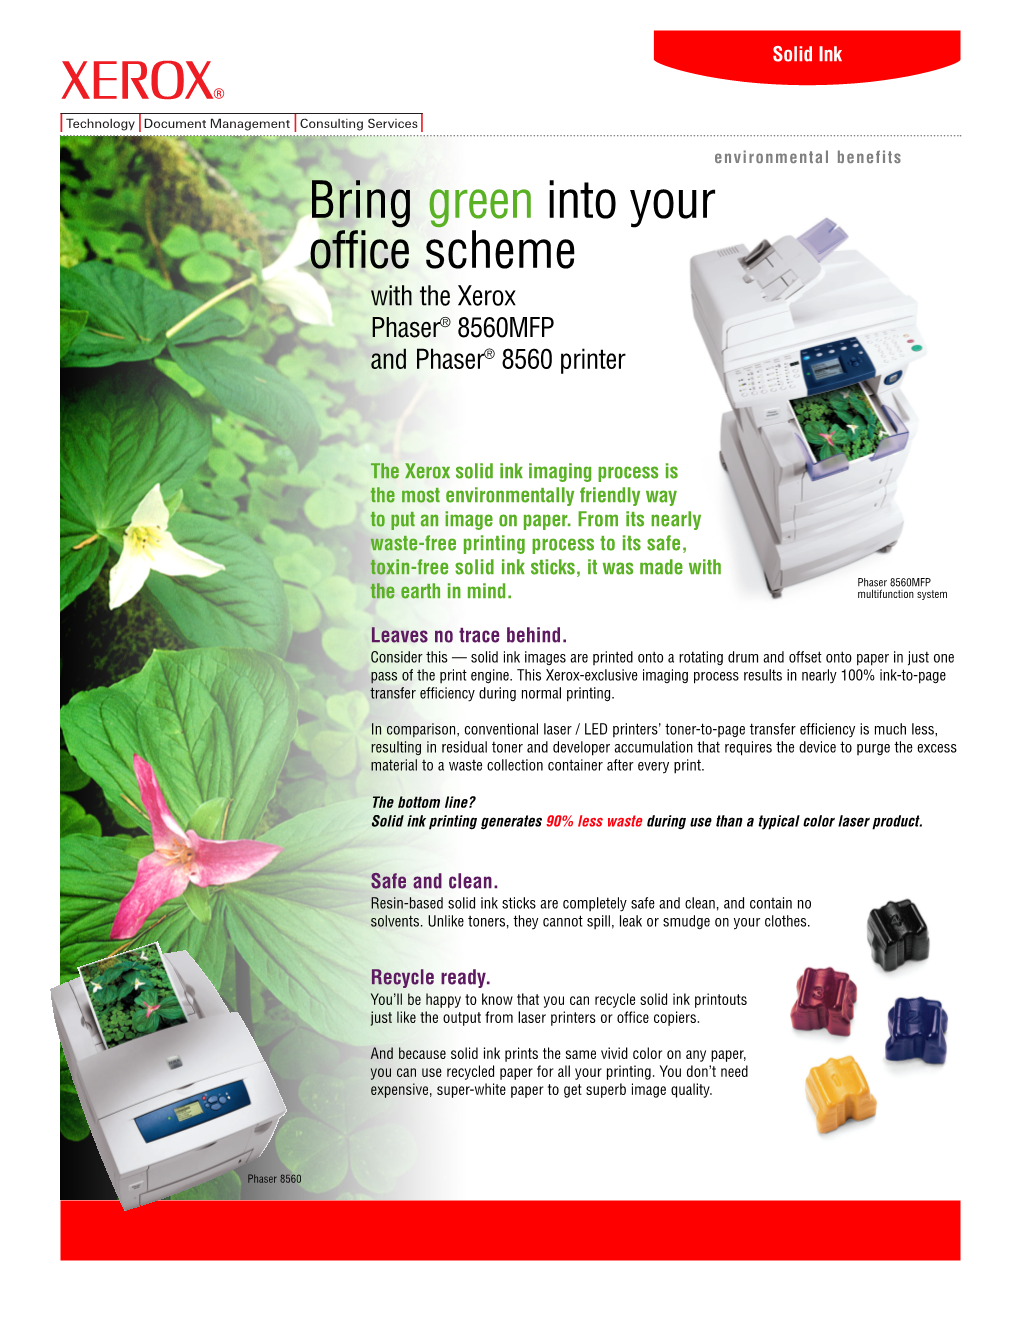 Bring Green Into Your Office Scheme with the Xerox Phaser® 8560MFP and Phaser® 8560 Printer